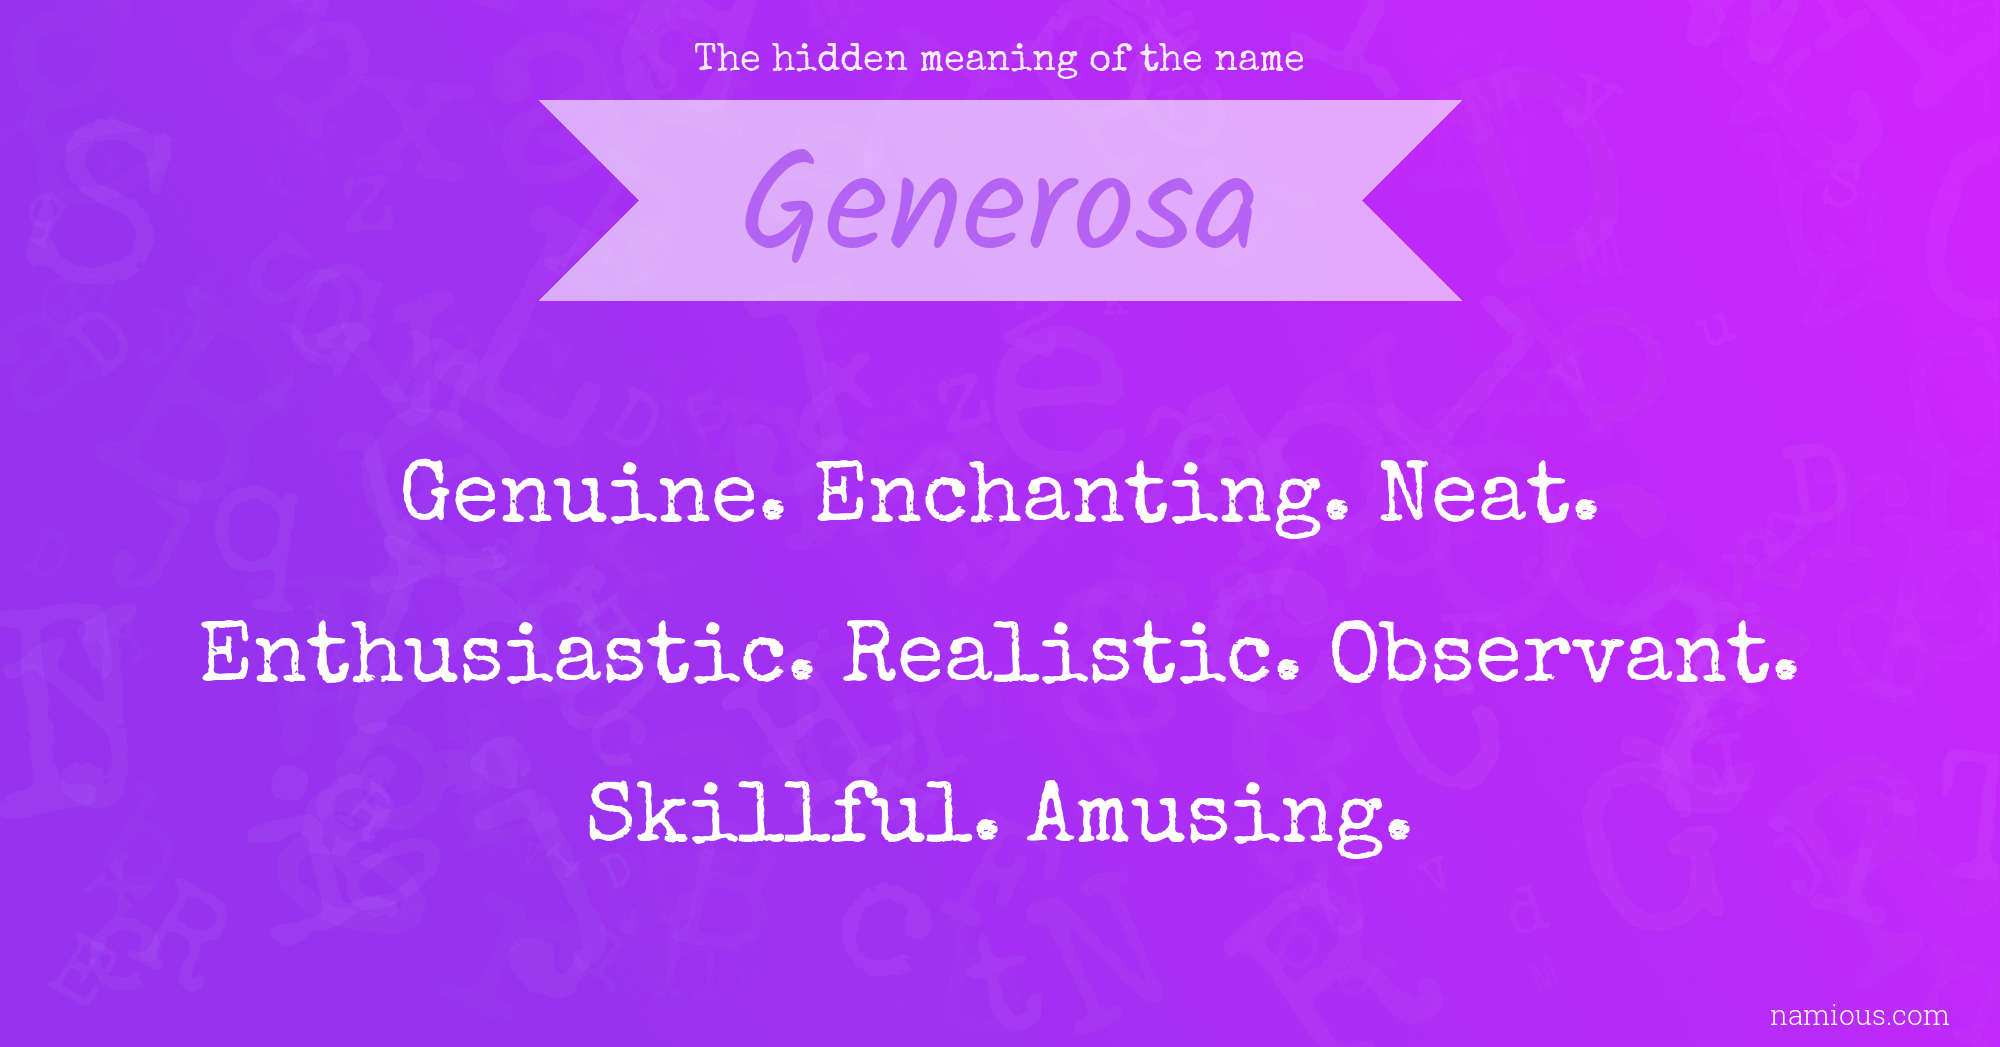 The hidden meaning of the name Generosa